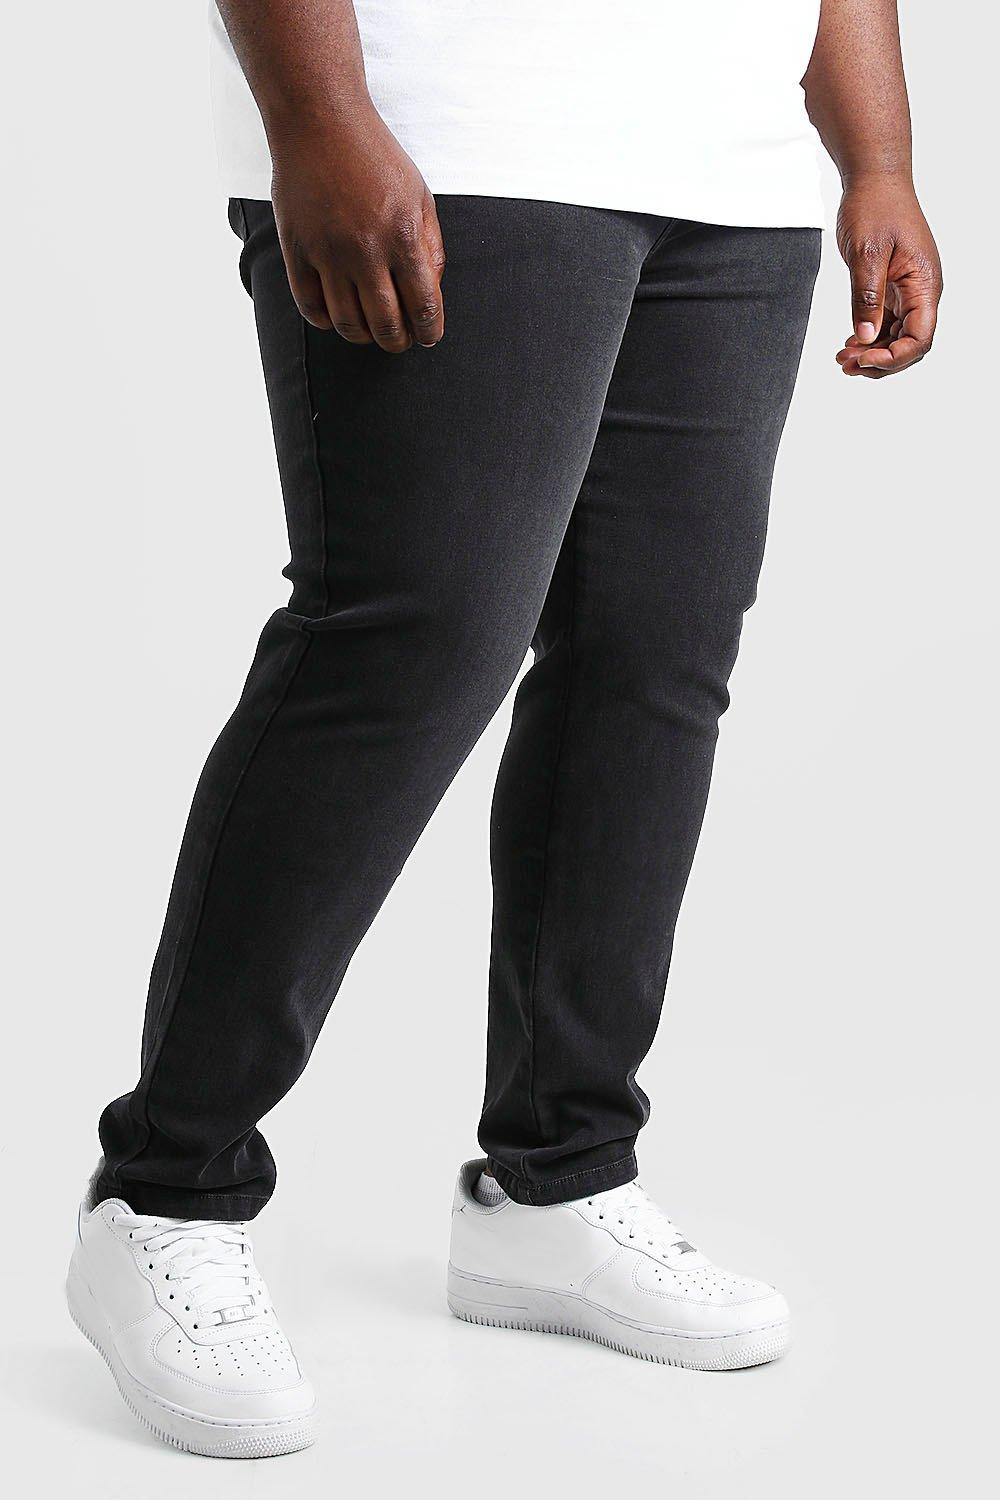 mens charcoal skinny jeans